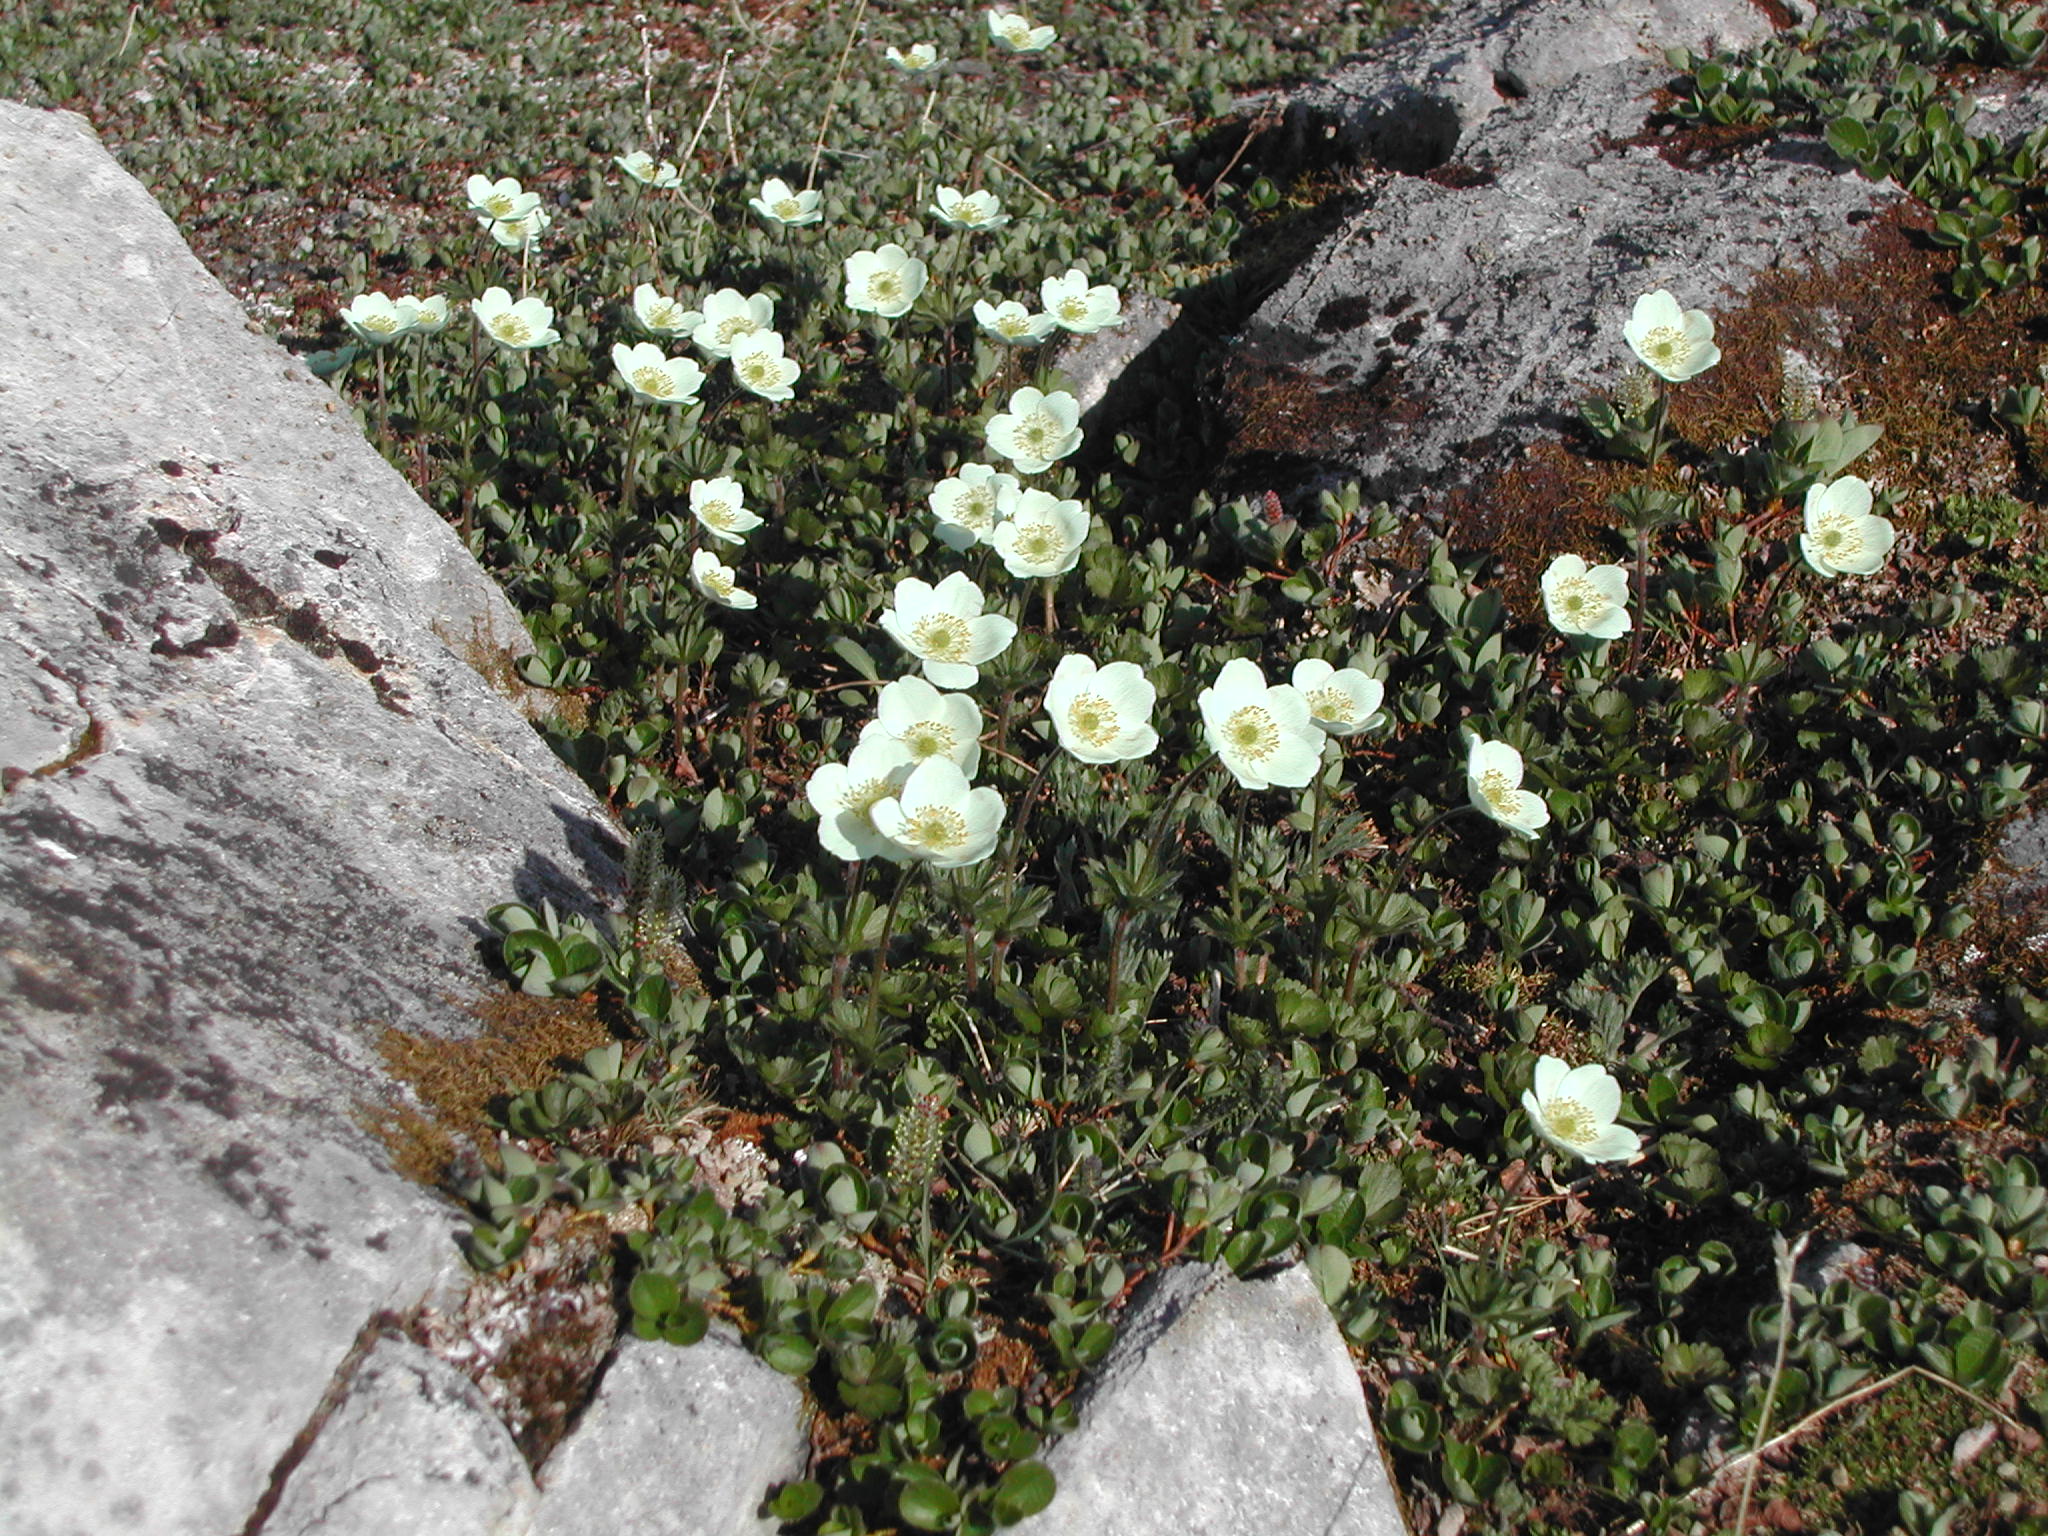 Wildflowers in July in the alpine tundra